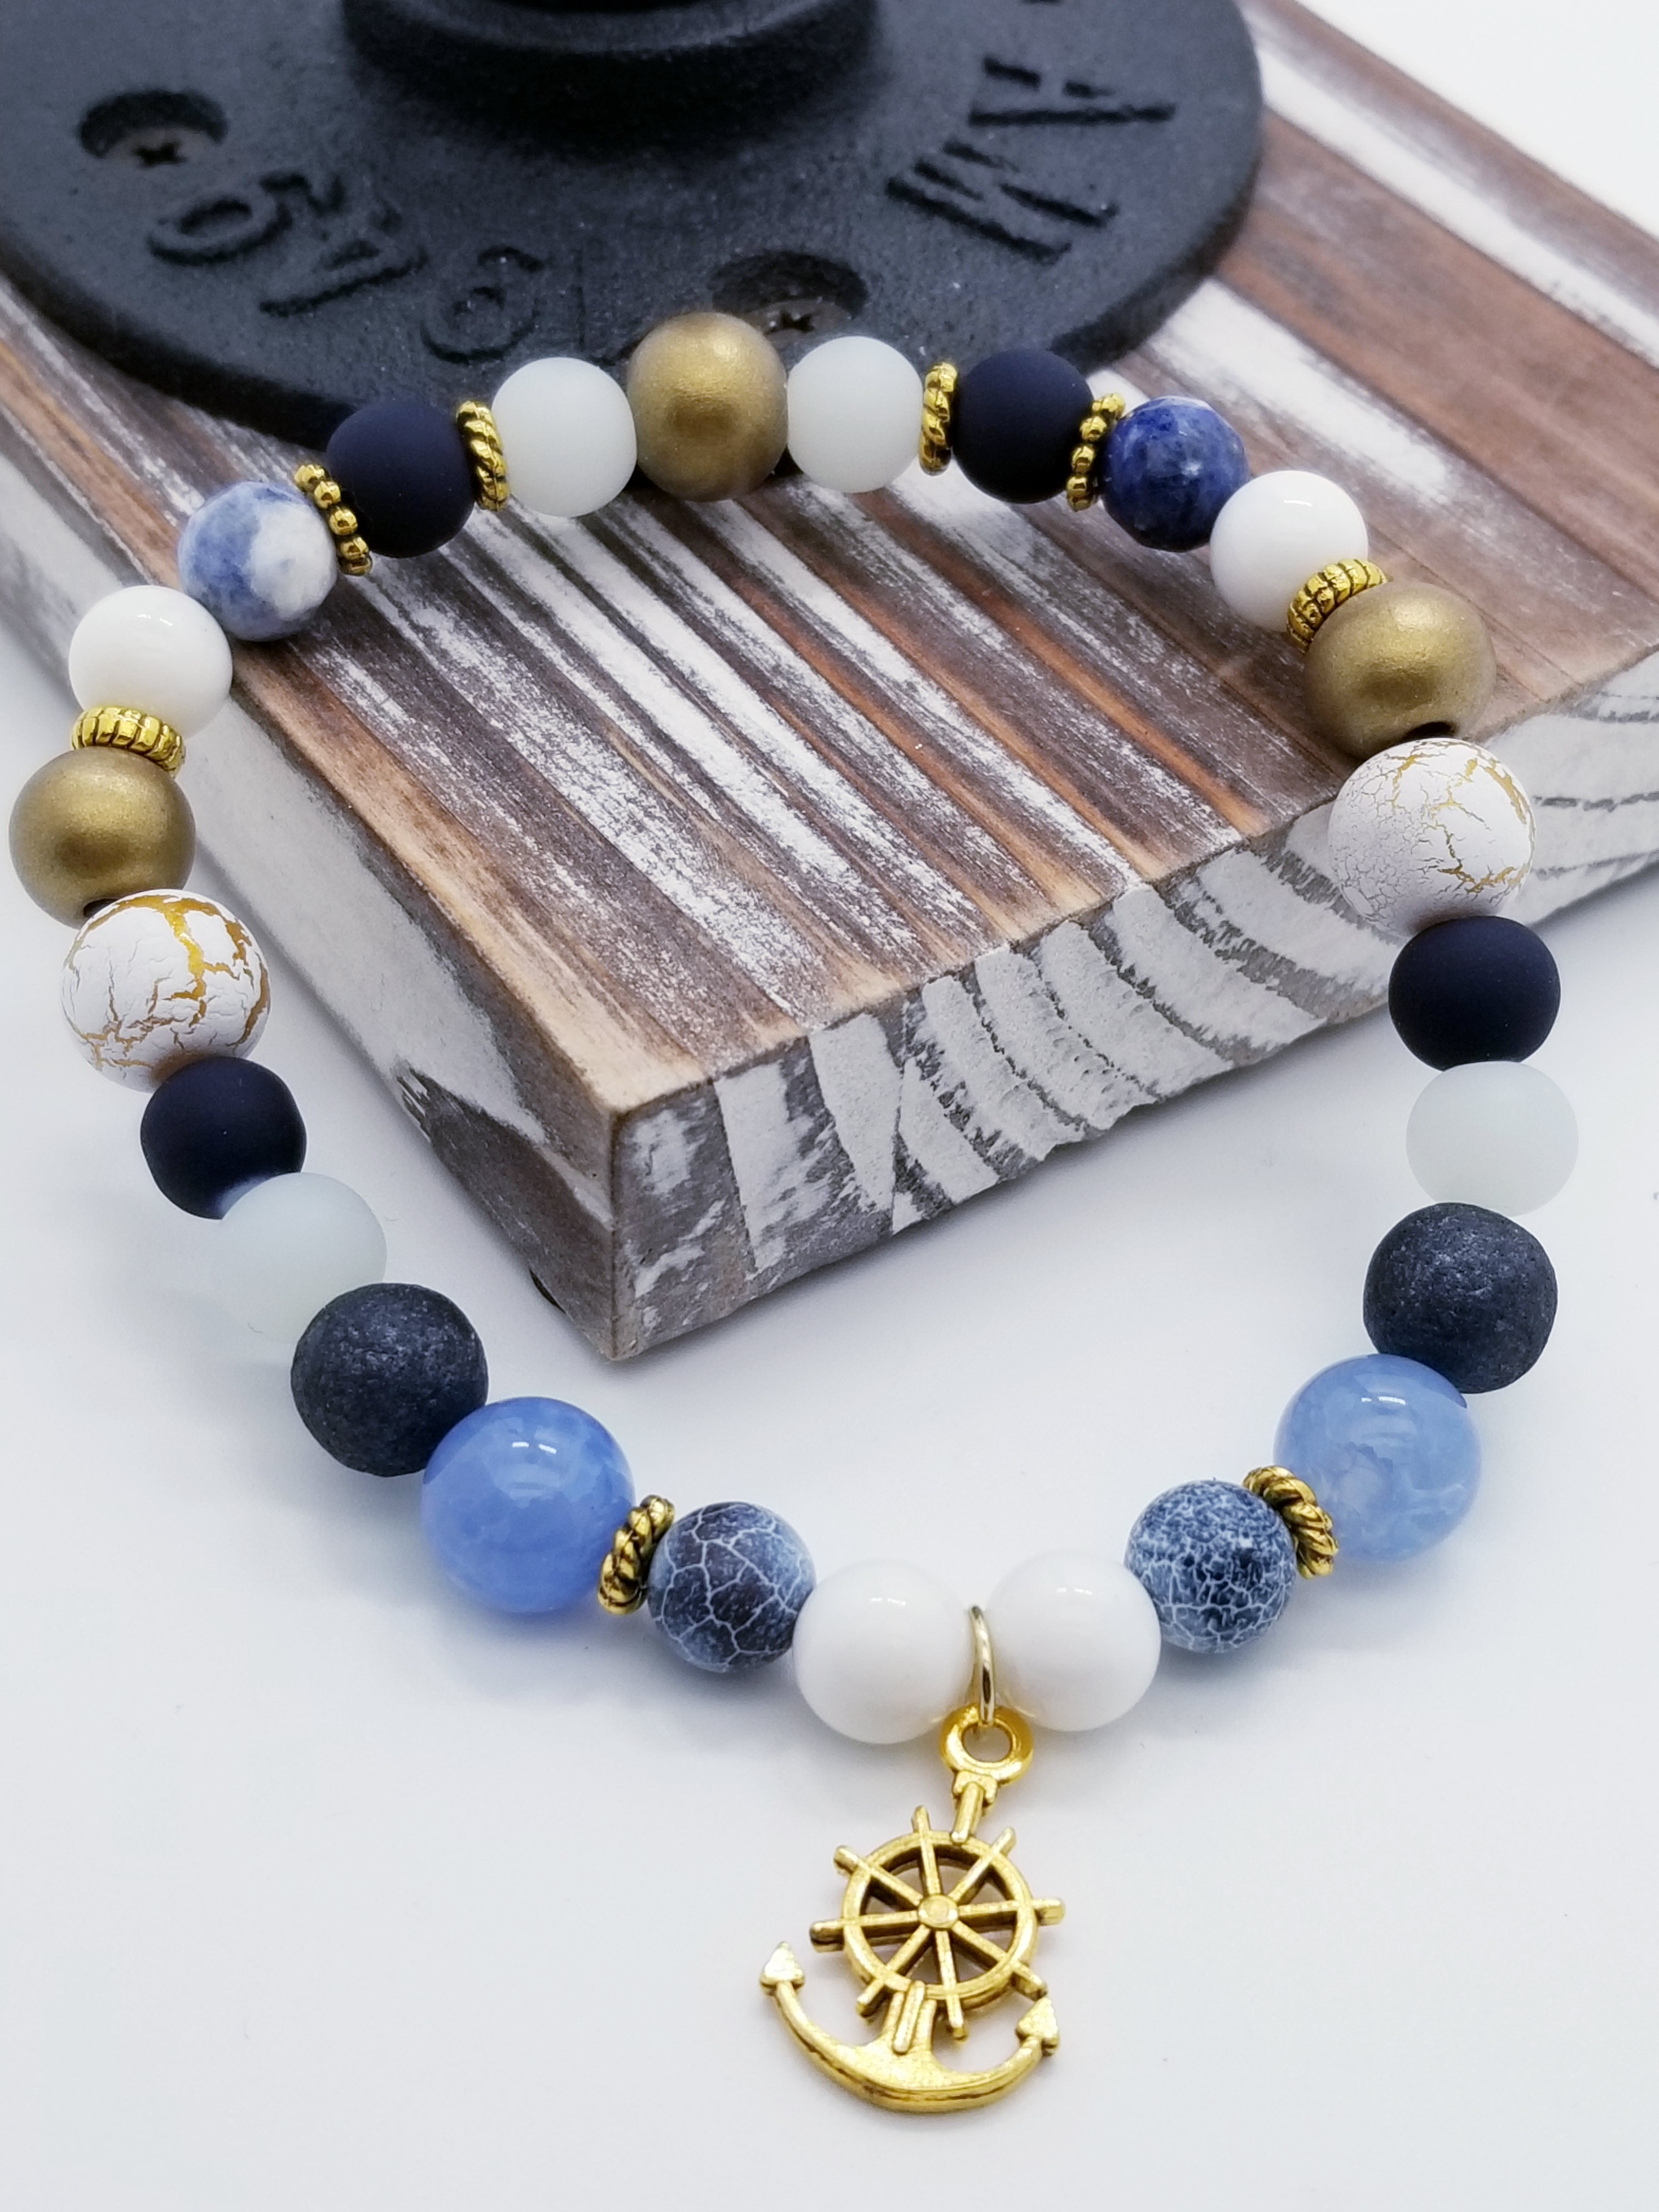 Honor, Courage, and Commitment (US Navy core values) inspired bracelet to honor our troops, veterans, and the families that support them! Anchor charm with white turquoise beads, indigo and navy marbled beads, gold and white marbled beads, navy matte glass beads, sky blue glass beads, gold faceted spacer beads, and gold spacers. 